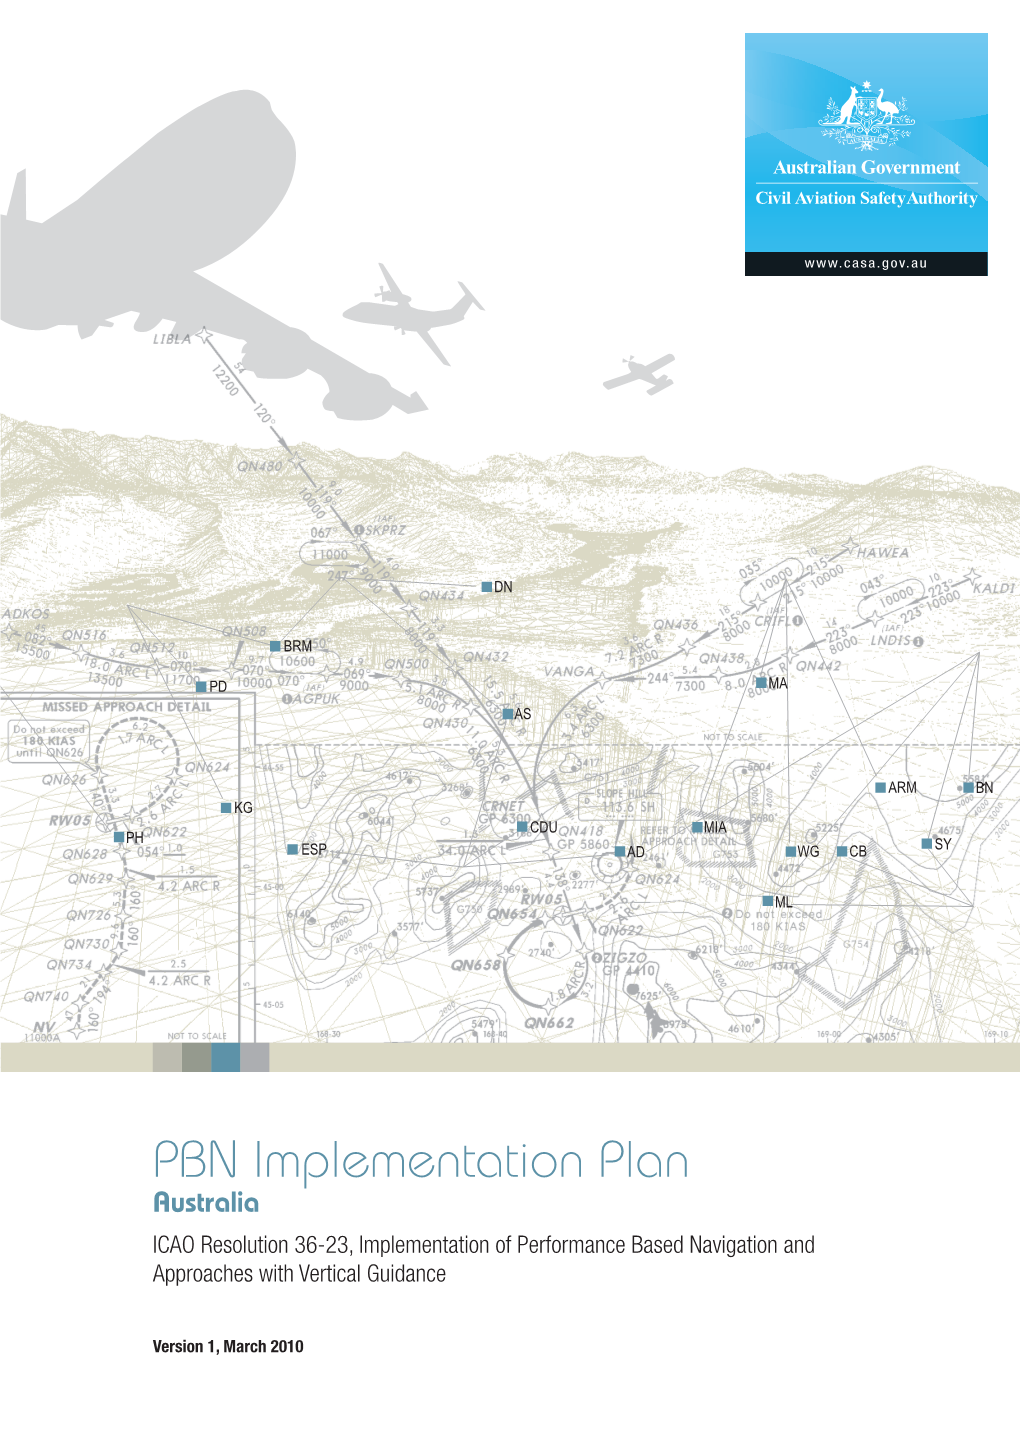 PBN Implementation Plan Australia ICAO Resolution 36-23, Implementation of Performance Based Navigation and Approaches with Vertical Guidance